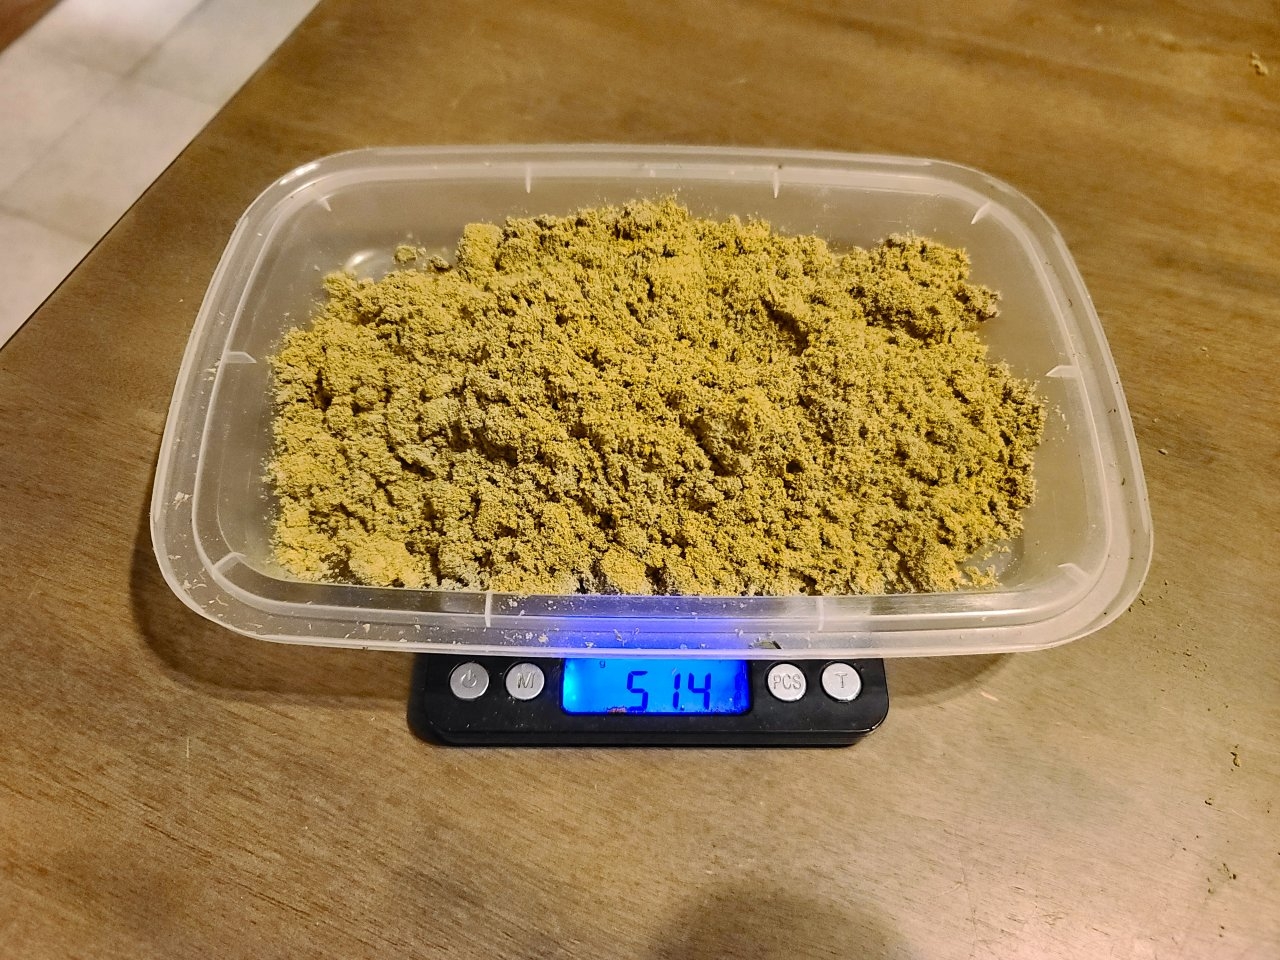 Made Some Dry Ice Hash Today | 420 Magazine